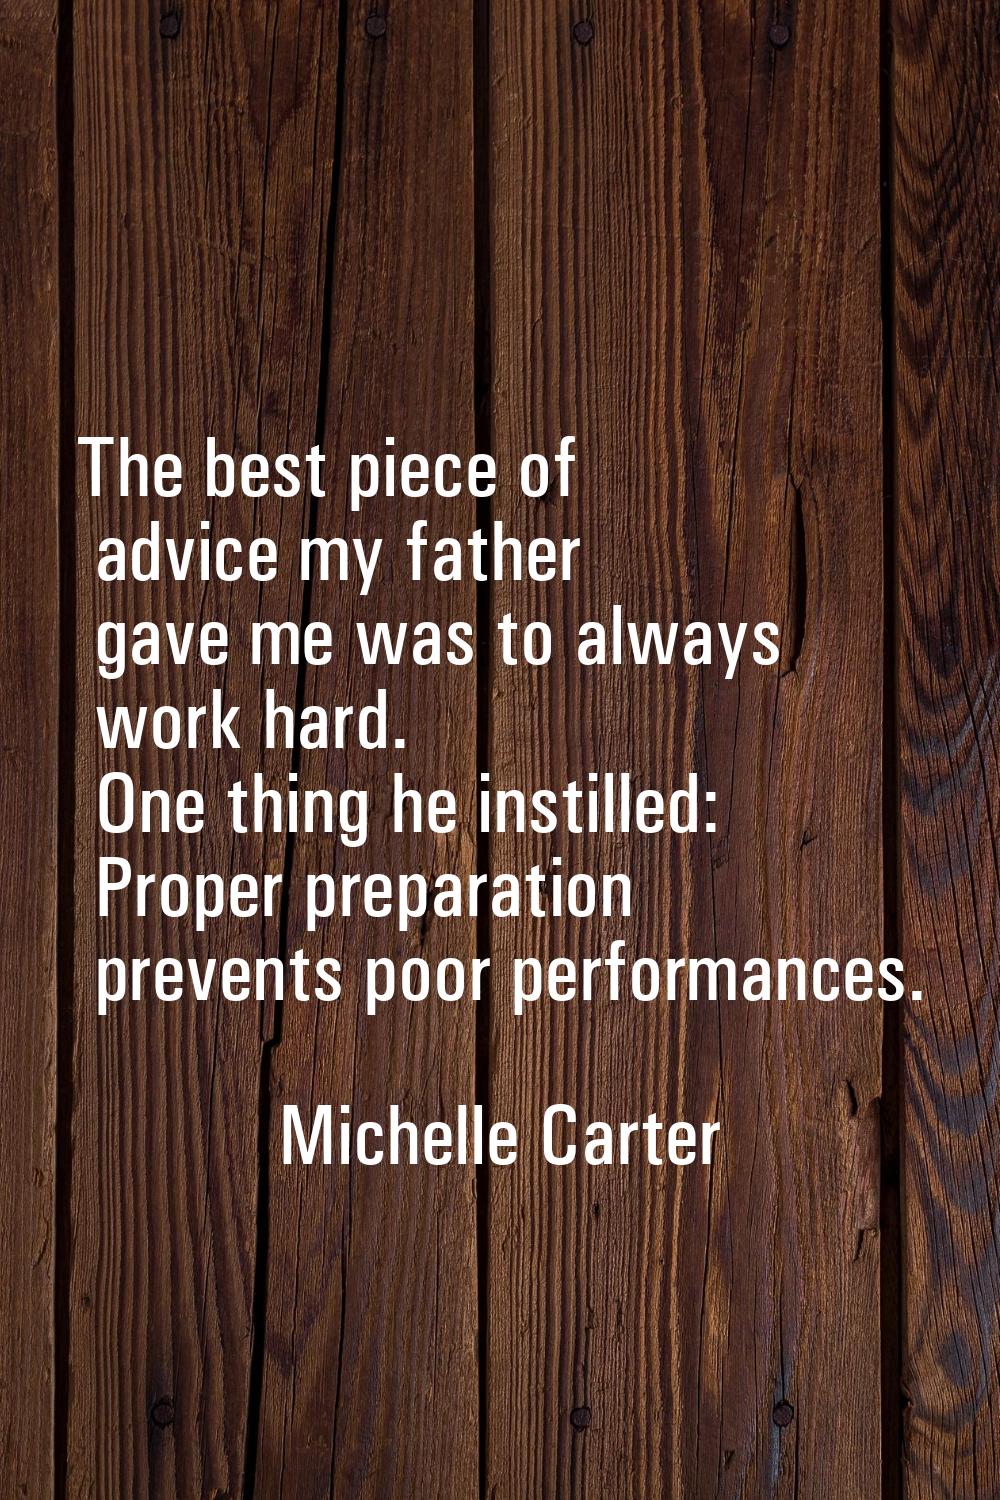 The best piece of advice my father gave me was to always work hard. One thing he instilled: Proper 